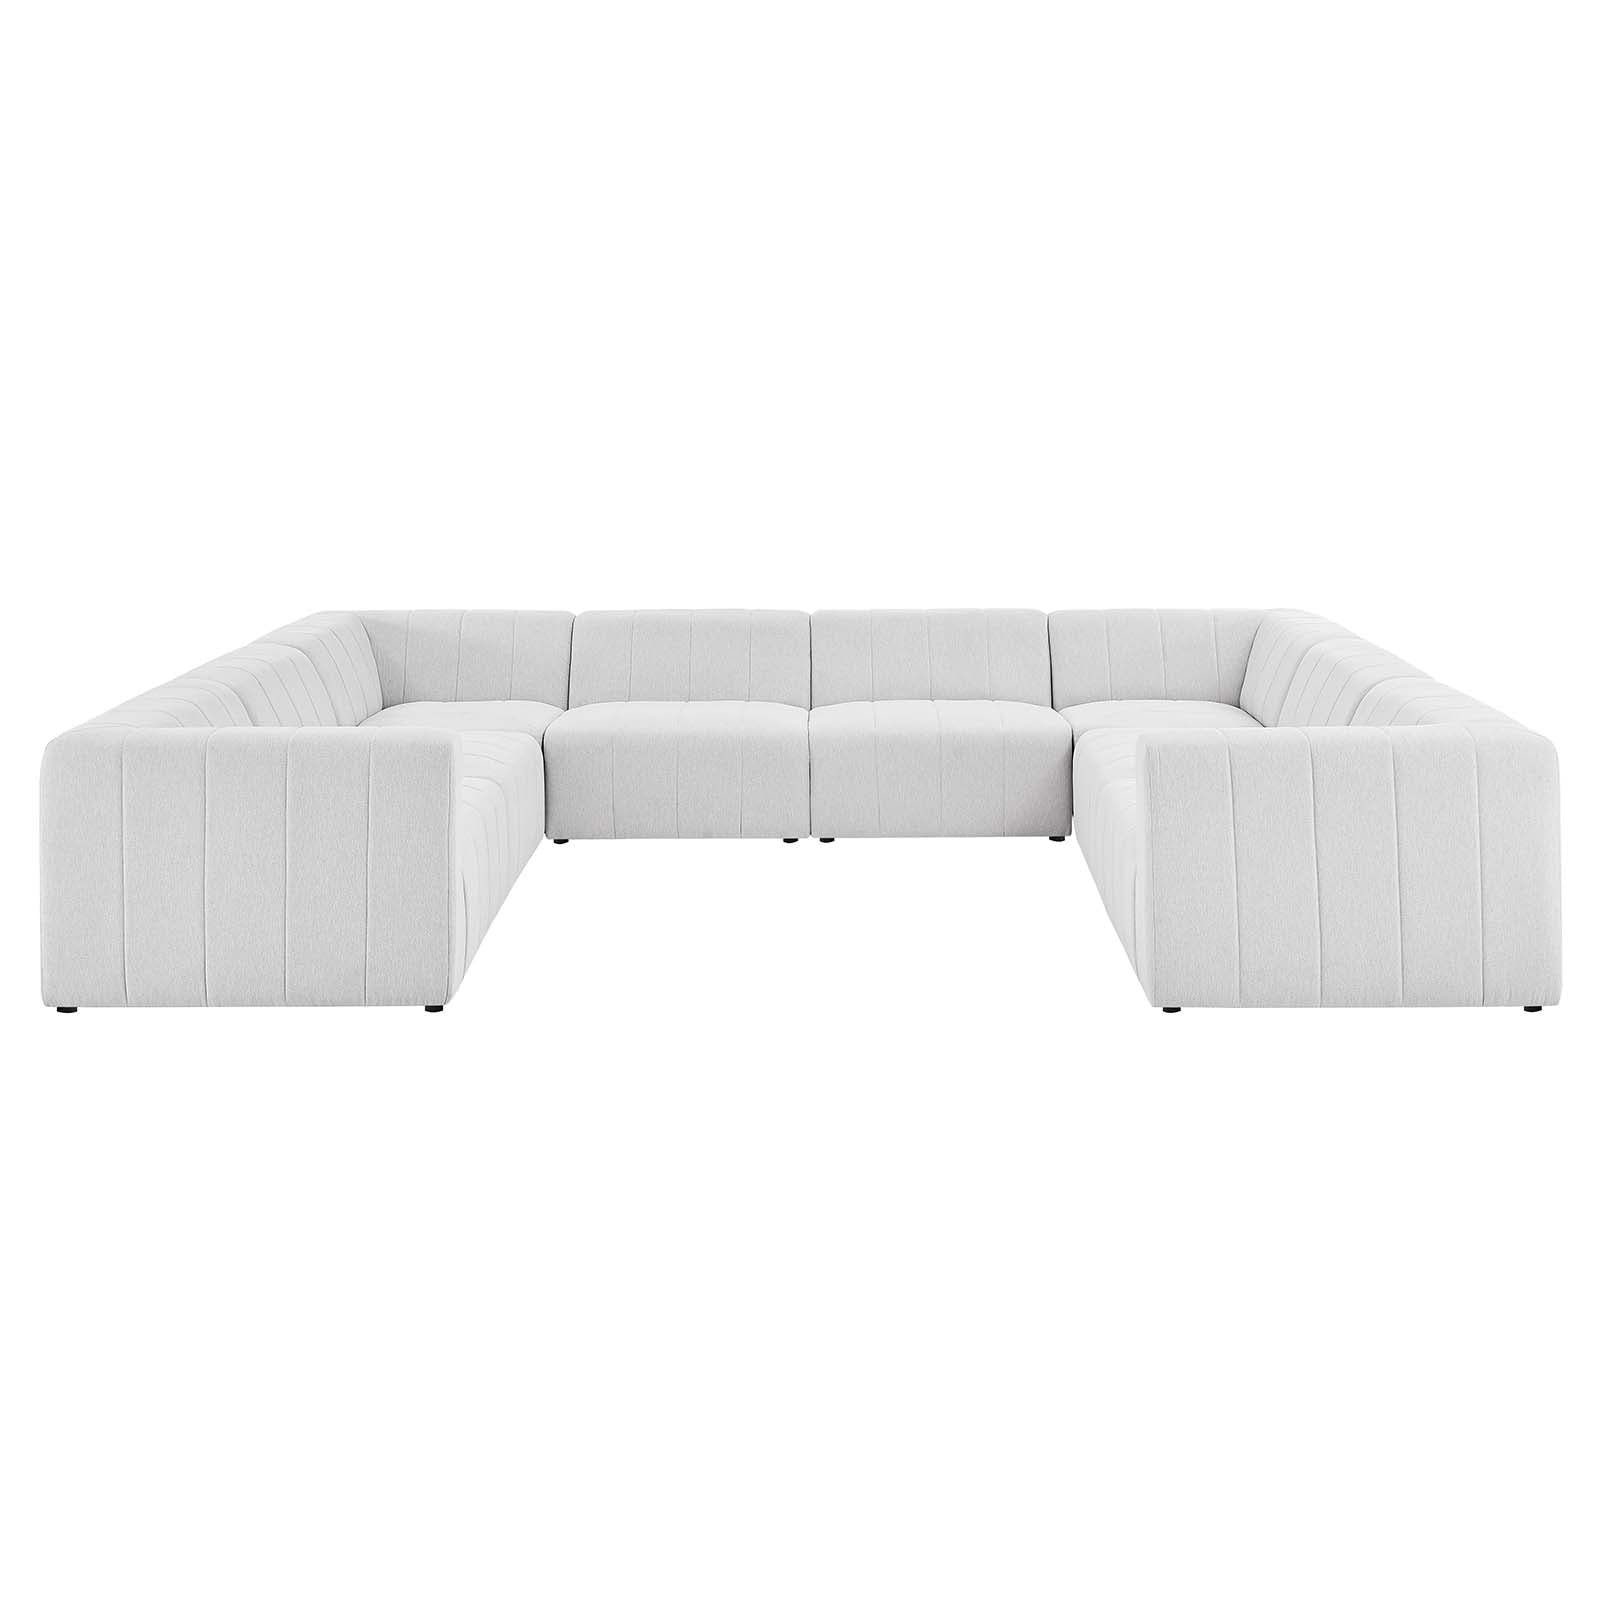 Modway Sectional Sofas - Bartlett Upholstered Fabric 8-Piece Sectional Sofa Ivory